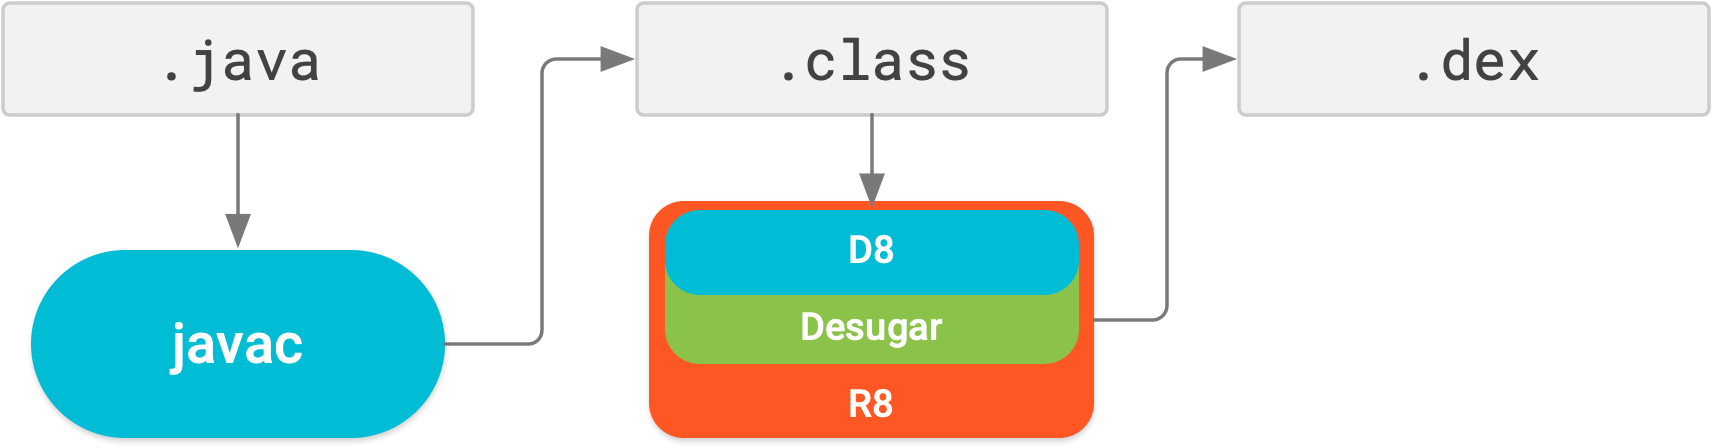 With R8, desugaring, shrinking, obfuscating, optimizing, and dexing
        are all performed in a single compile step.